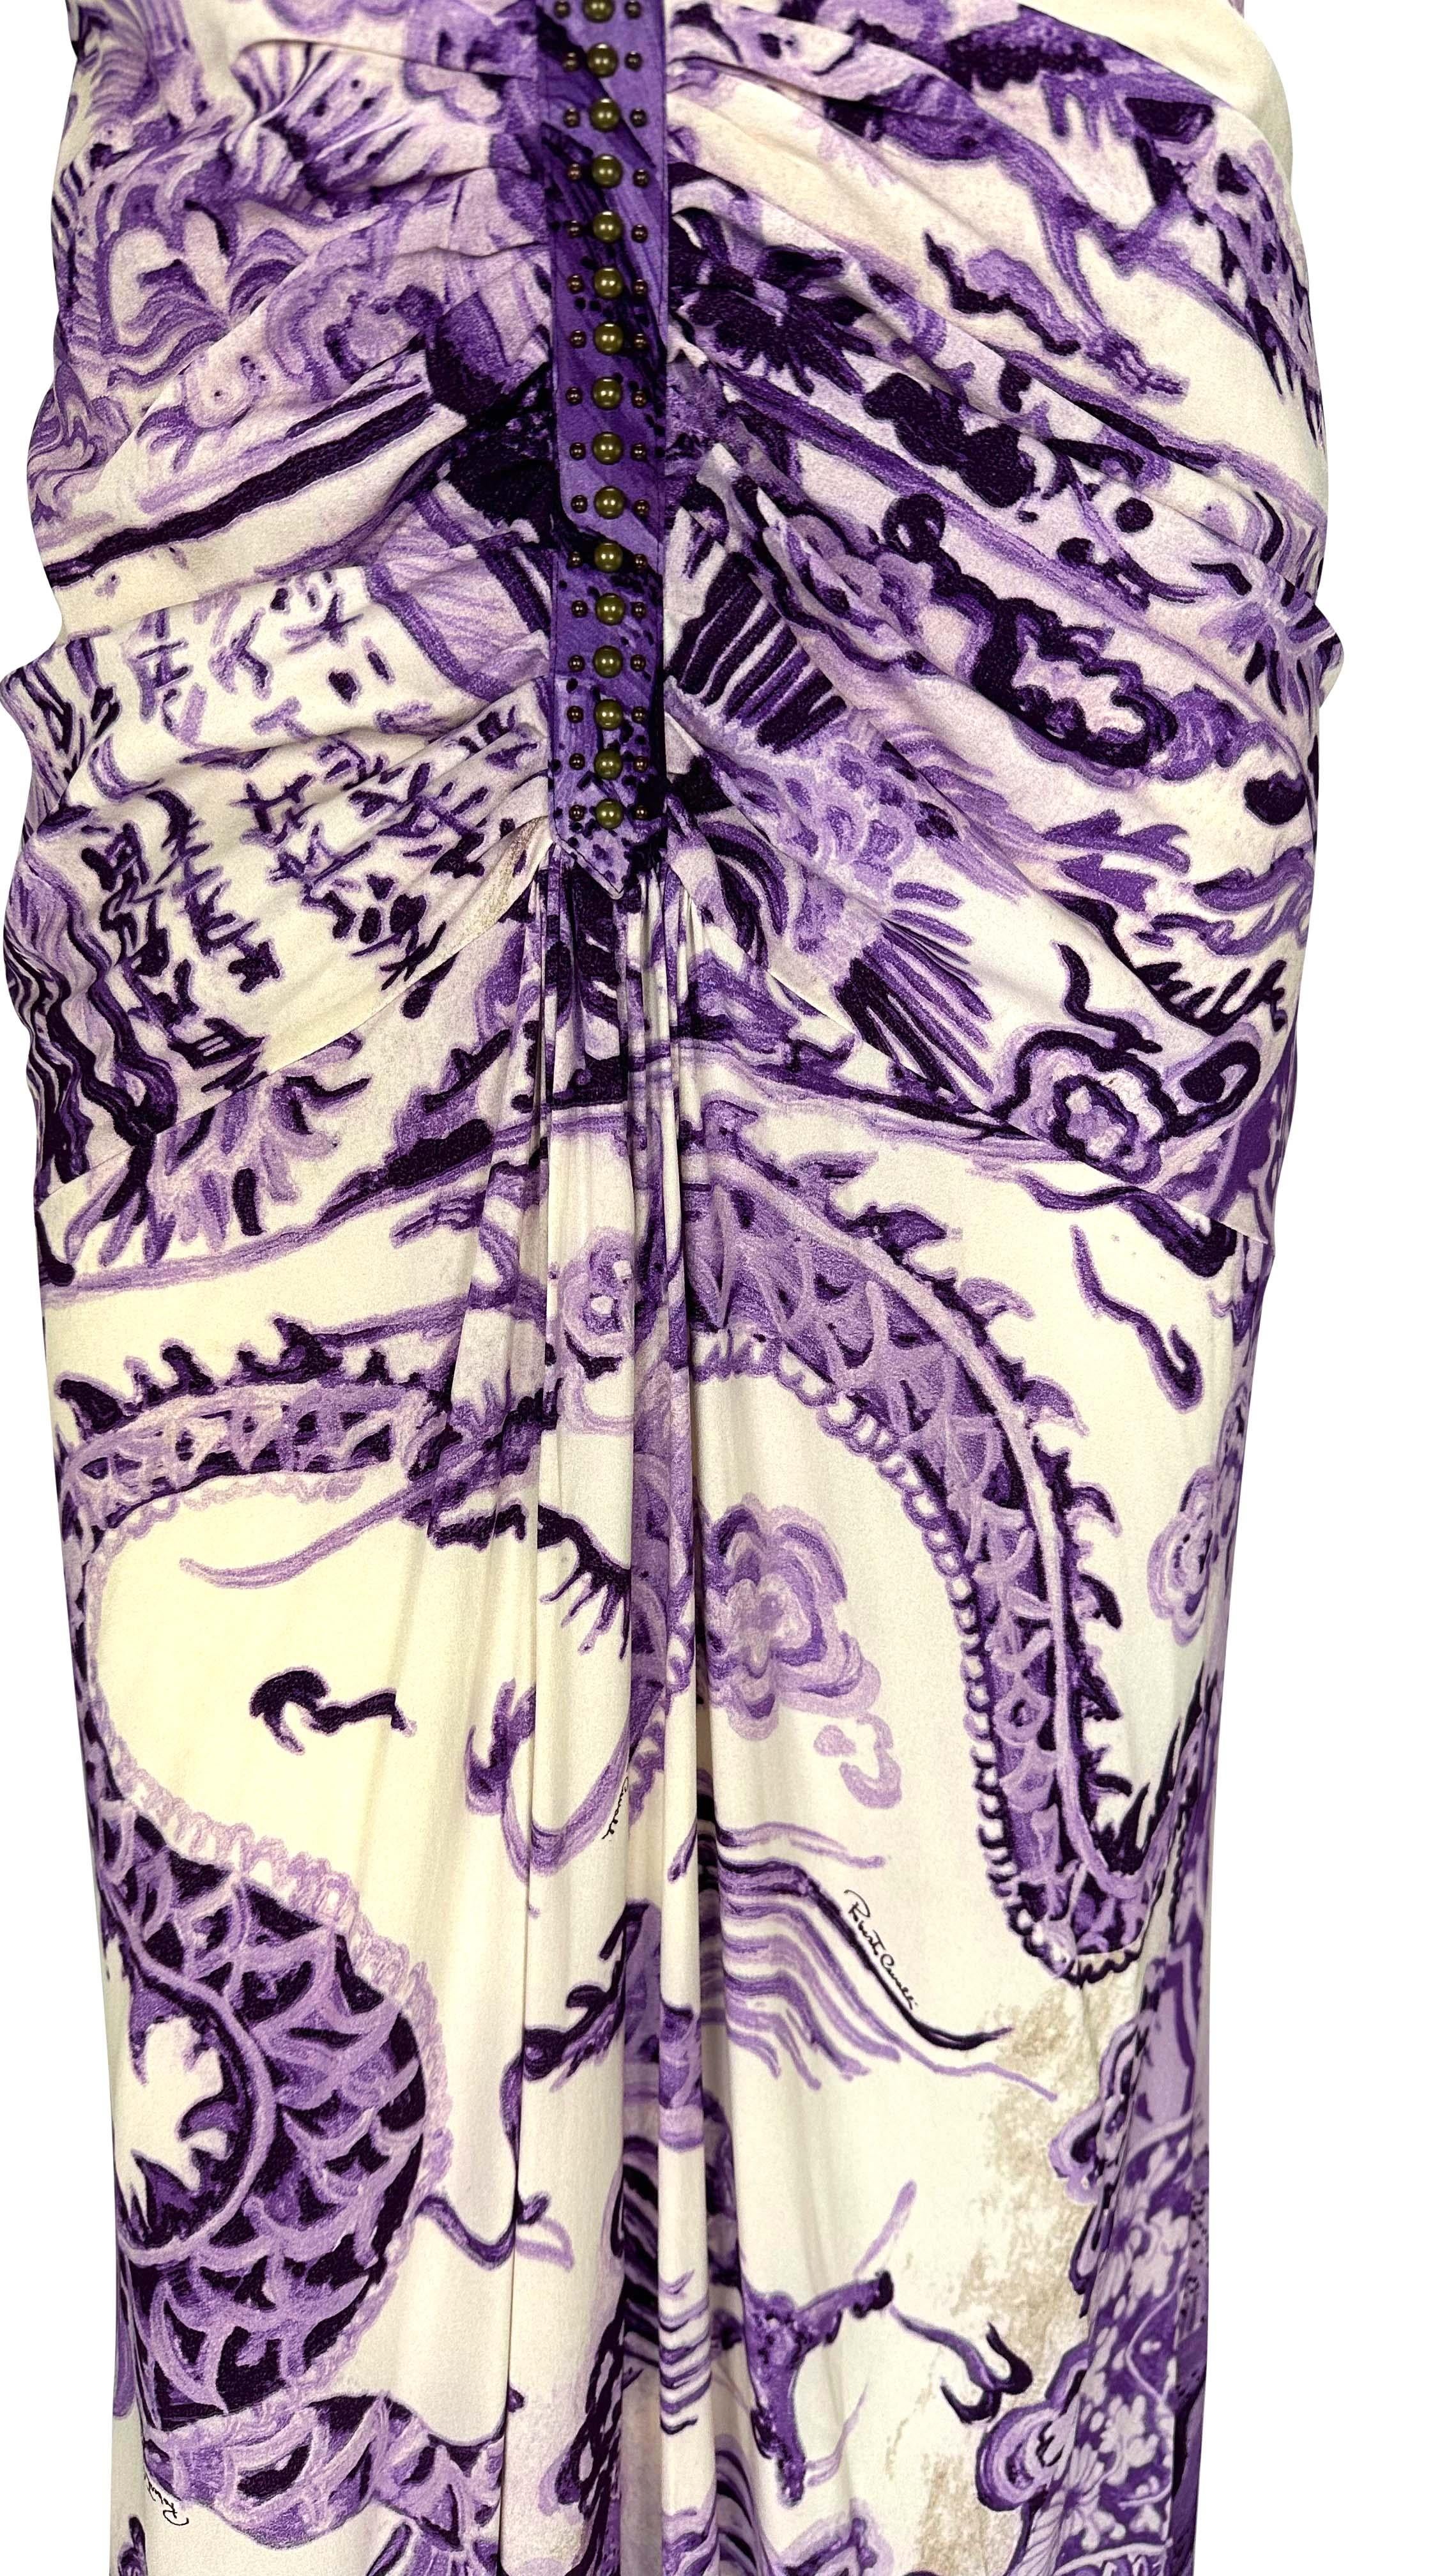 F/W 2005 Roberto Cavalli Ming Vase Print Studded Purple Flare Chinoiserie Gown For Sale 1